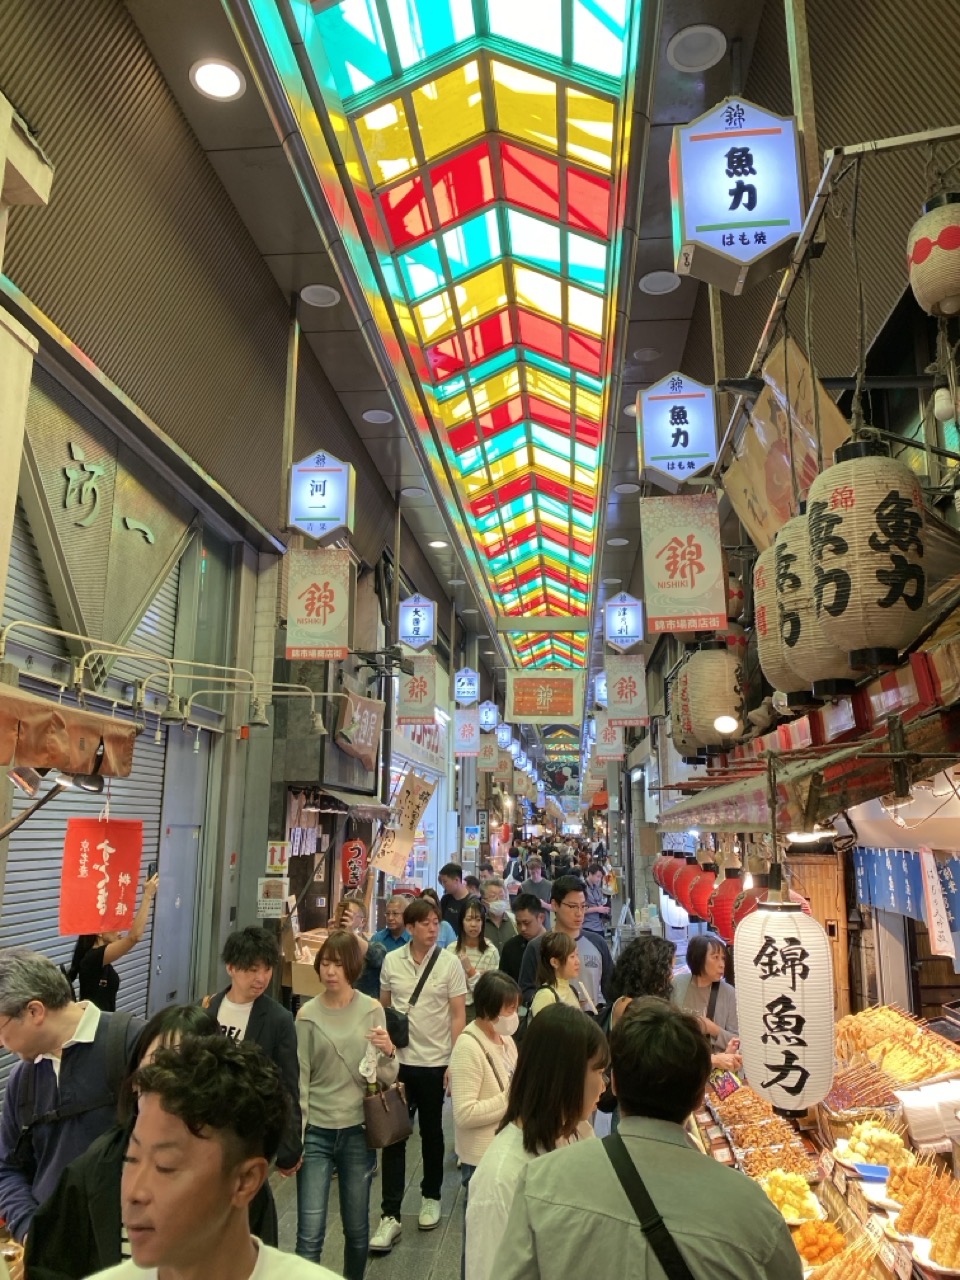 A view along Nishiki market with lots of people